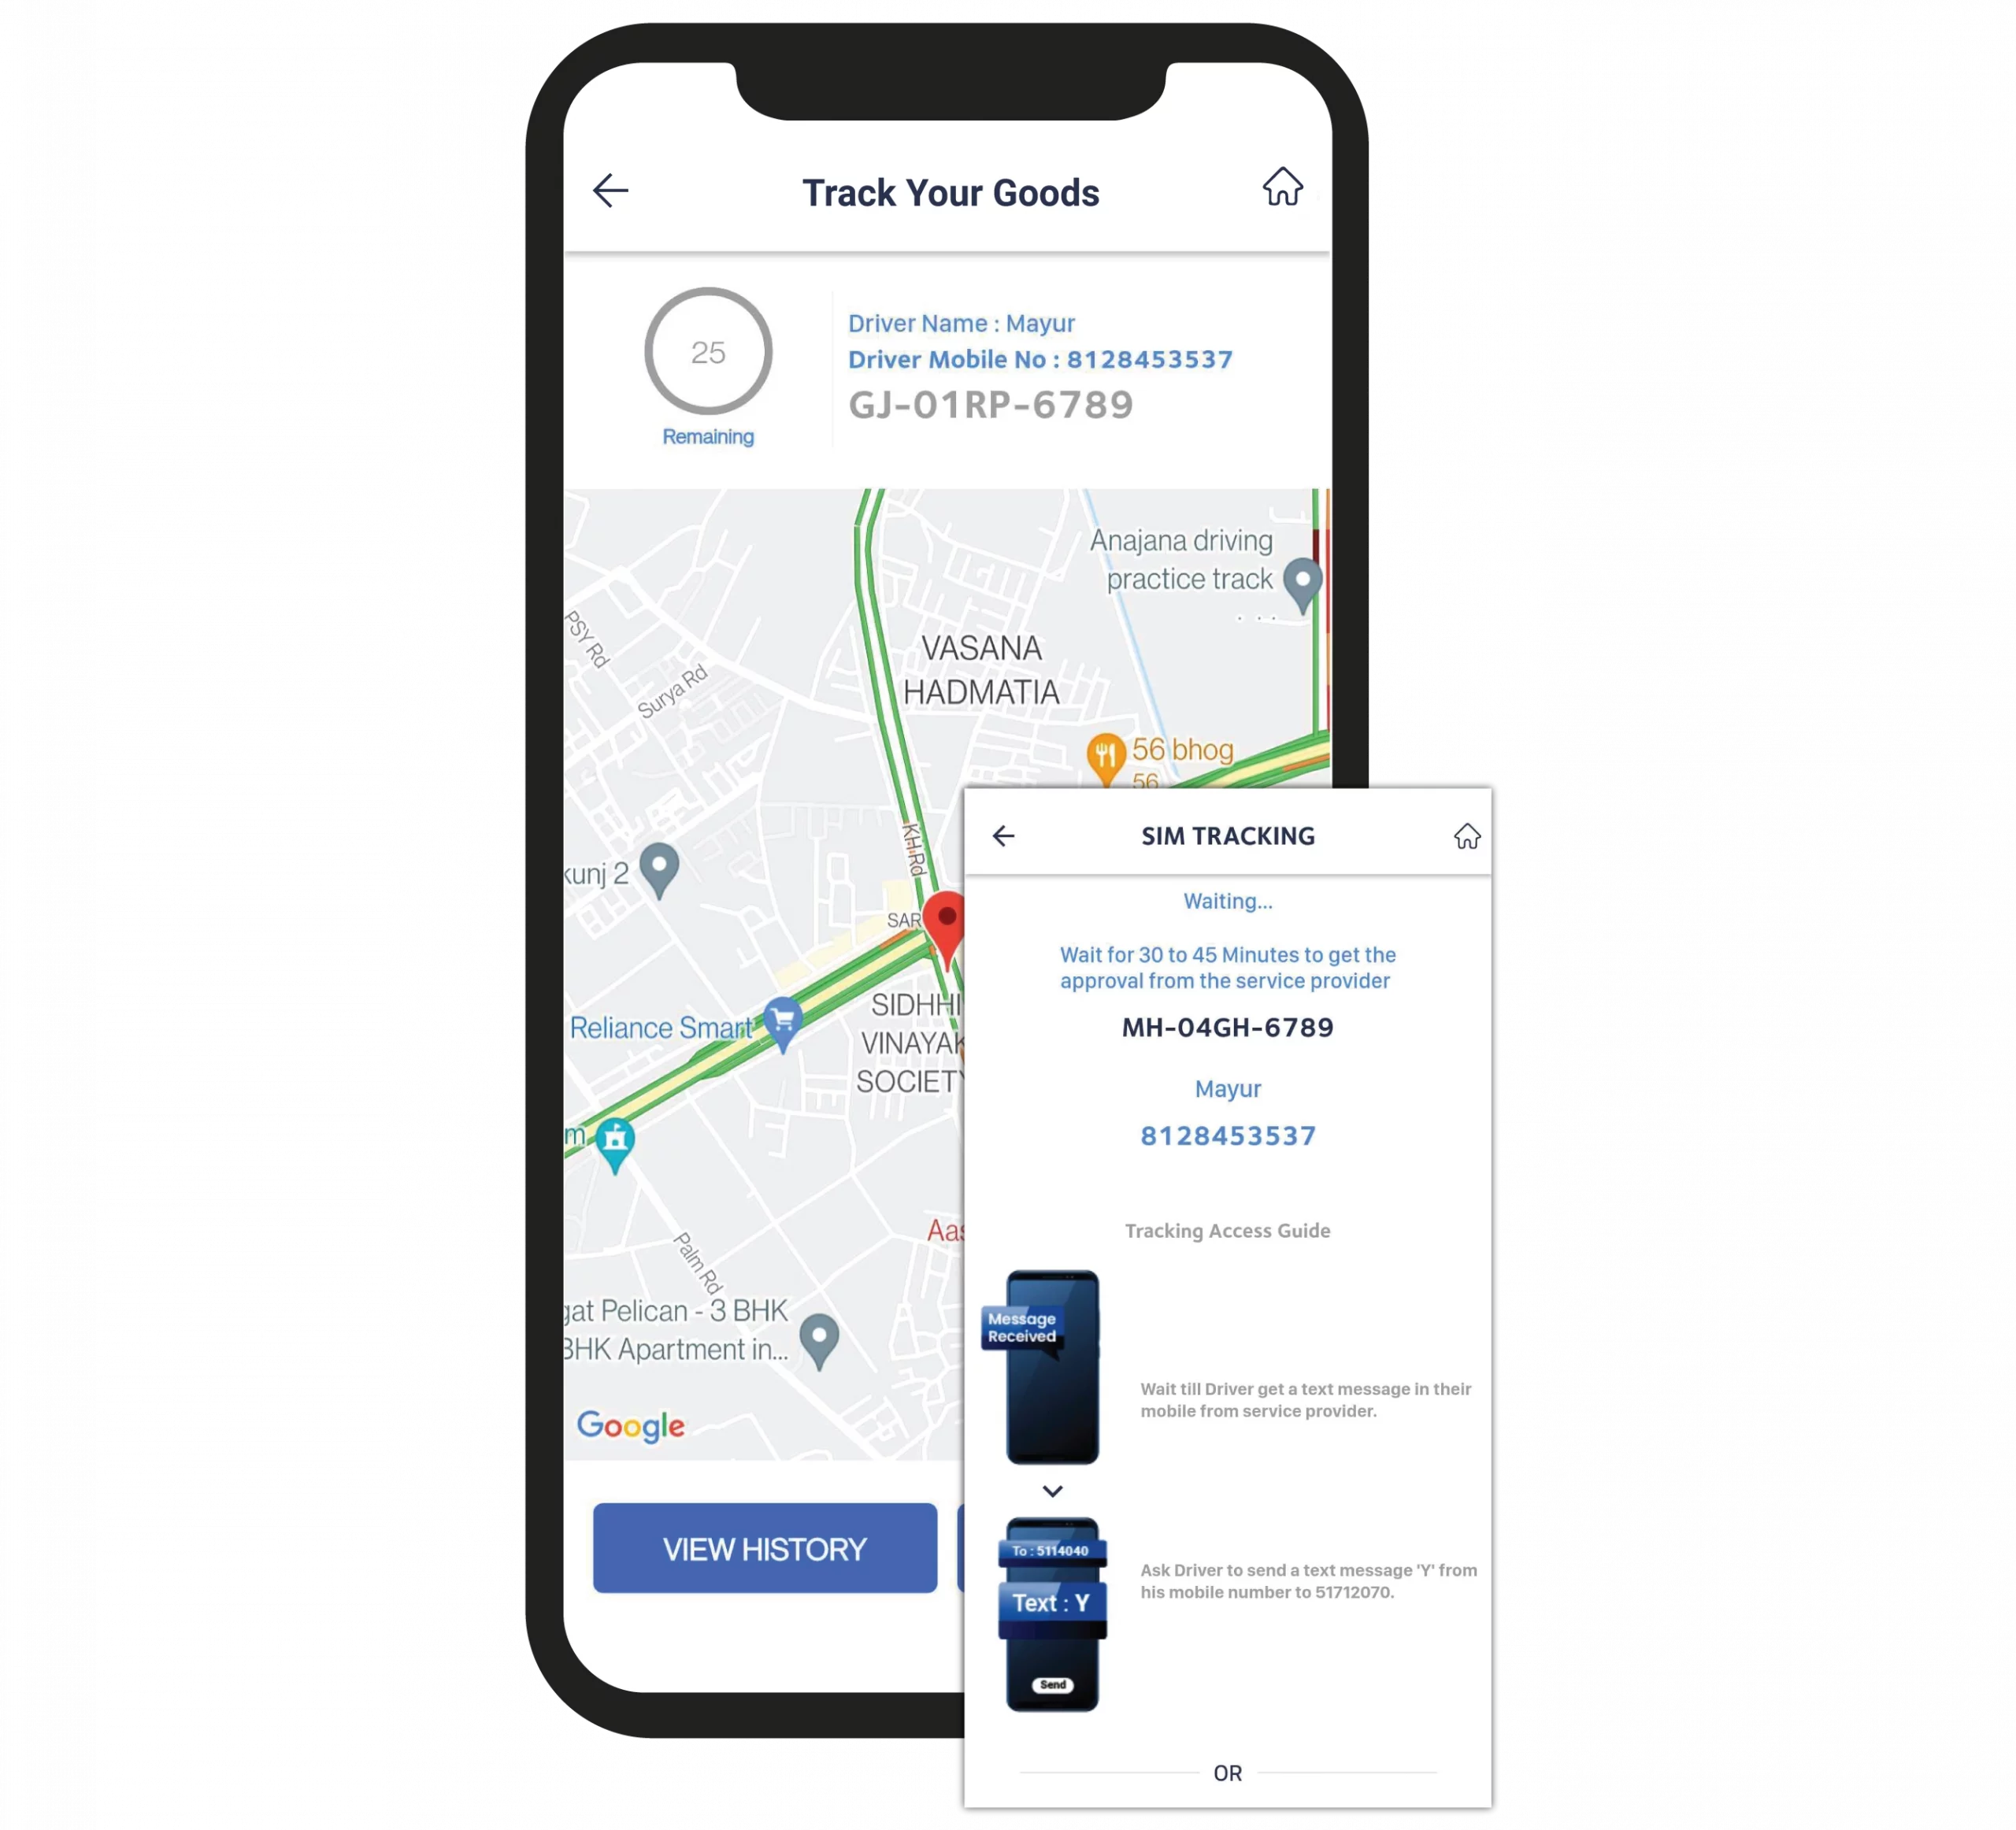 OnlineLR How can you track a vehicle without any GPS or external hardware